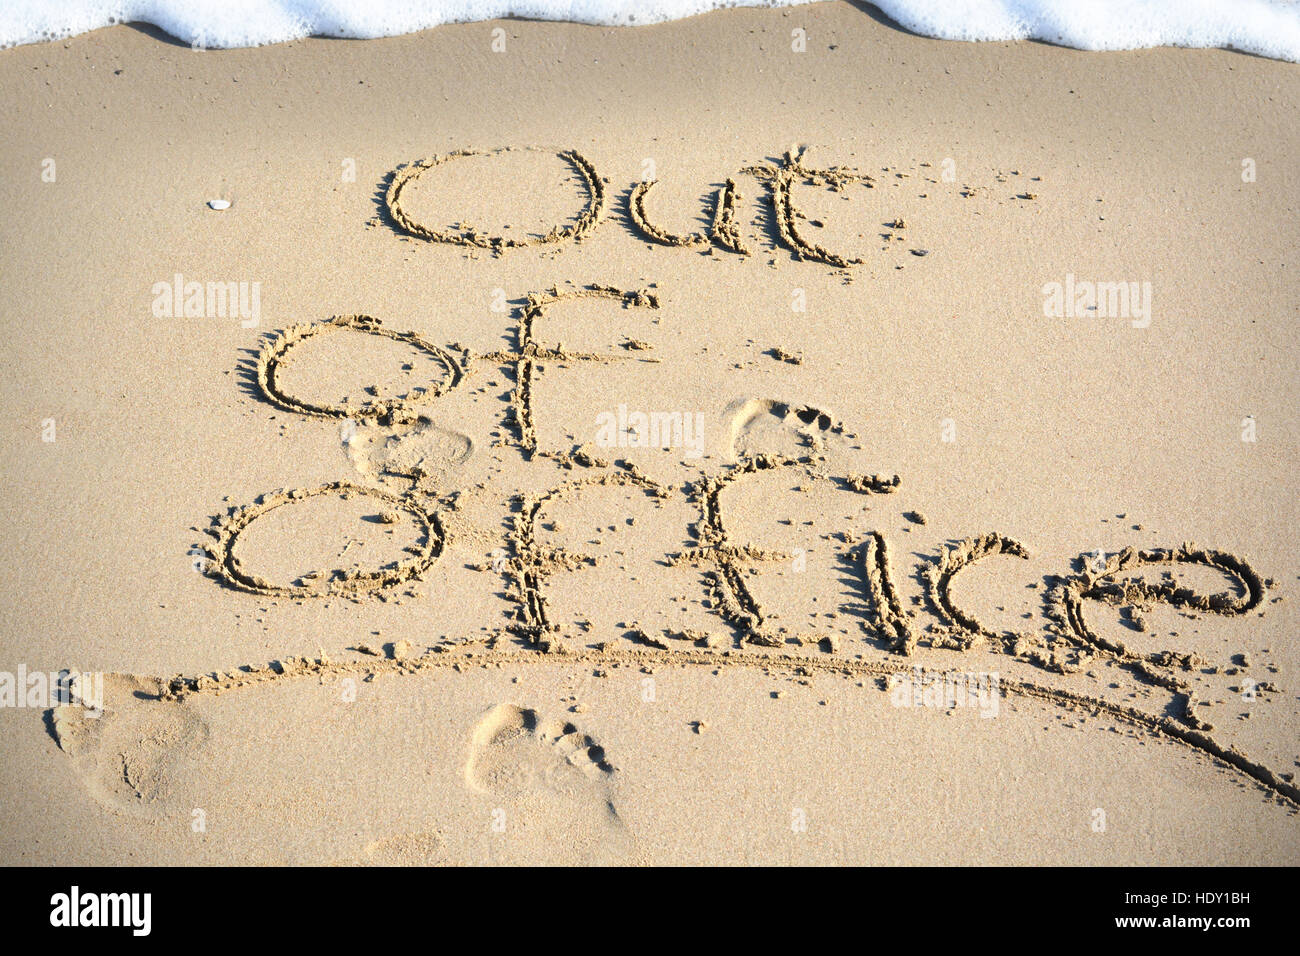 Out of office text written in sand on a beach suggesting work life balance Stock Photo